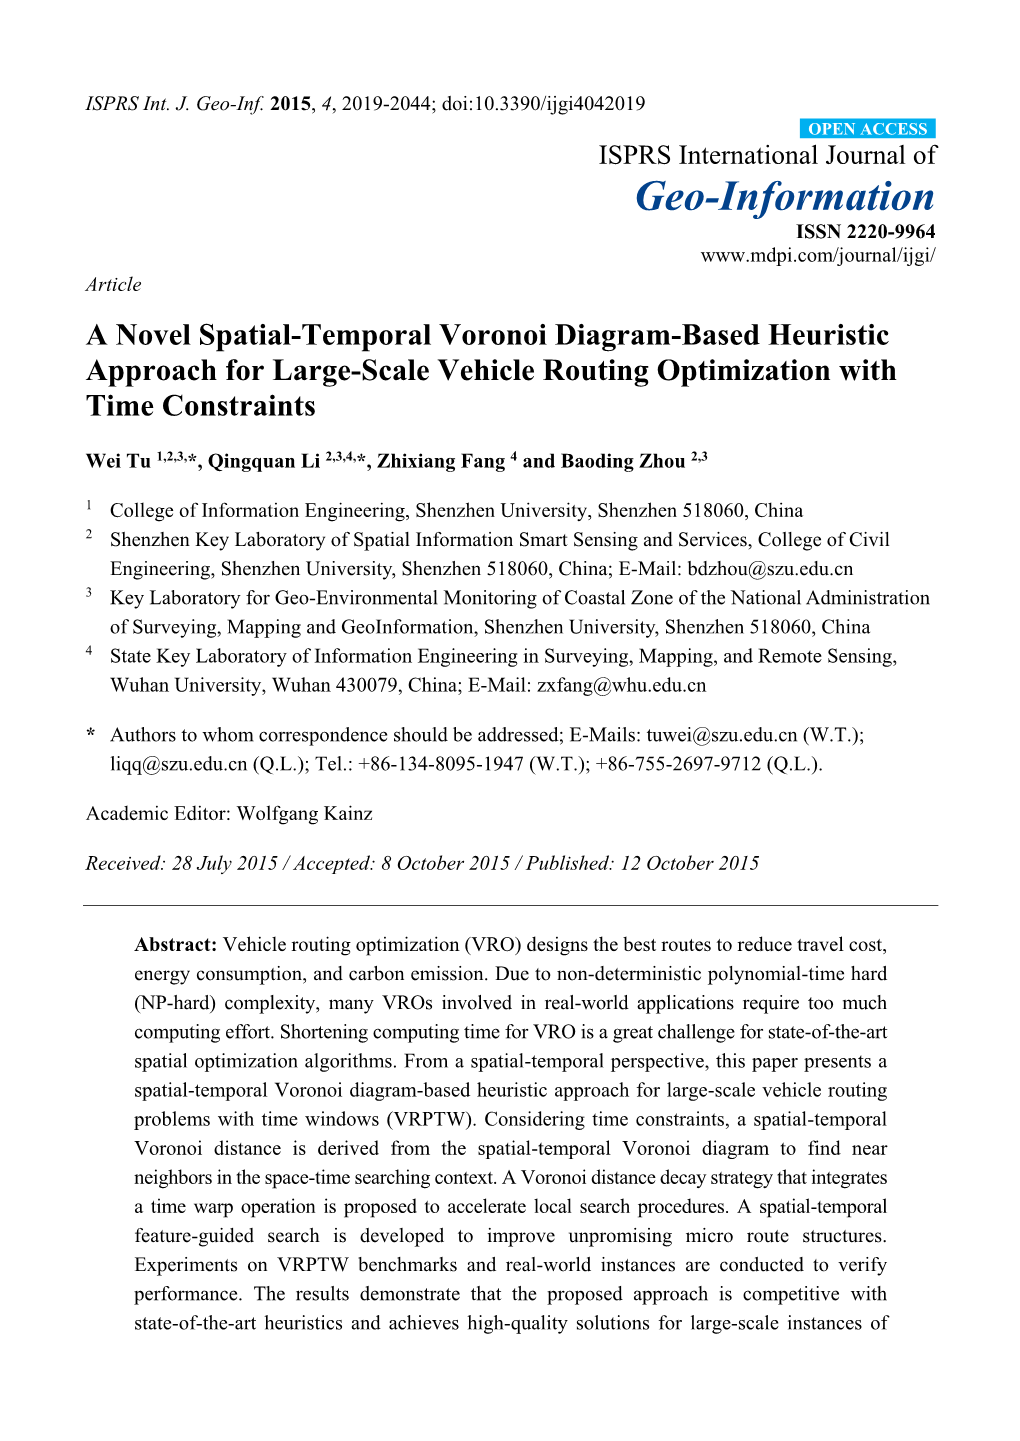 A Novel Spatial-Temporal Voronoi Diagram-Based Heuristic Approach for Large-Scale Vehicle Routing Optimization with Time Constraints